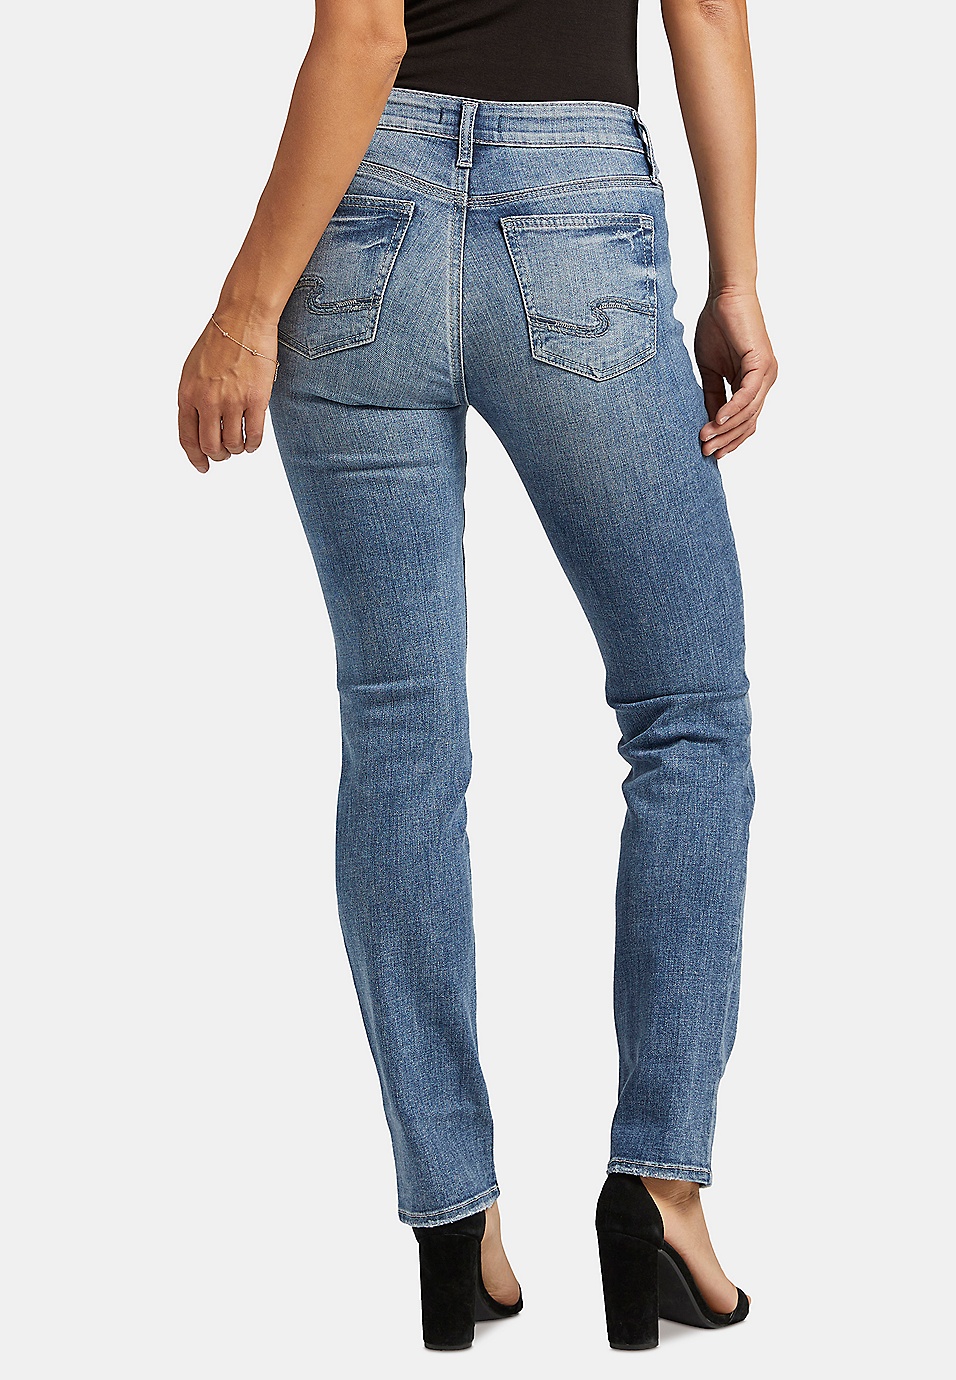 Silver Jeans Co. Most Wanted Button Front Straight Jeans